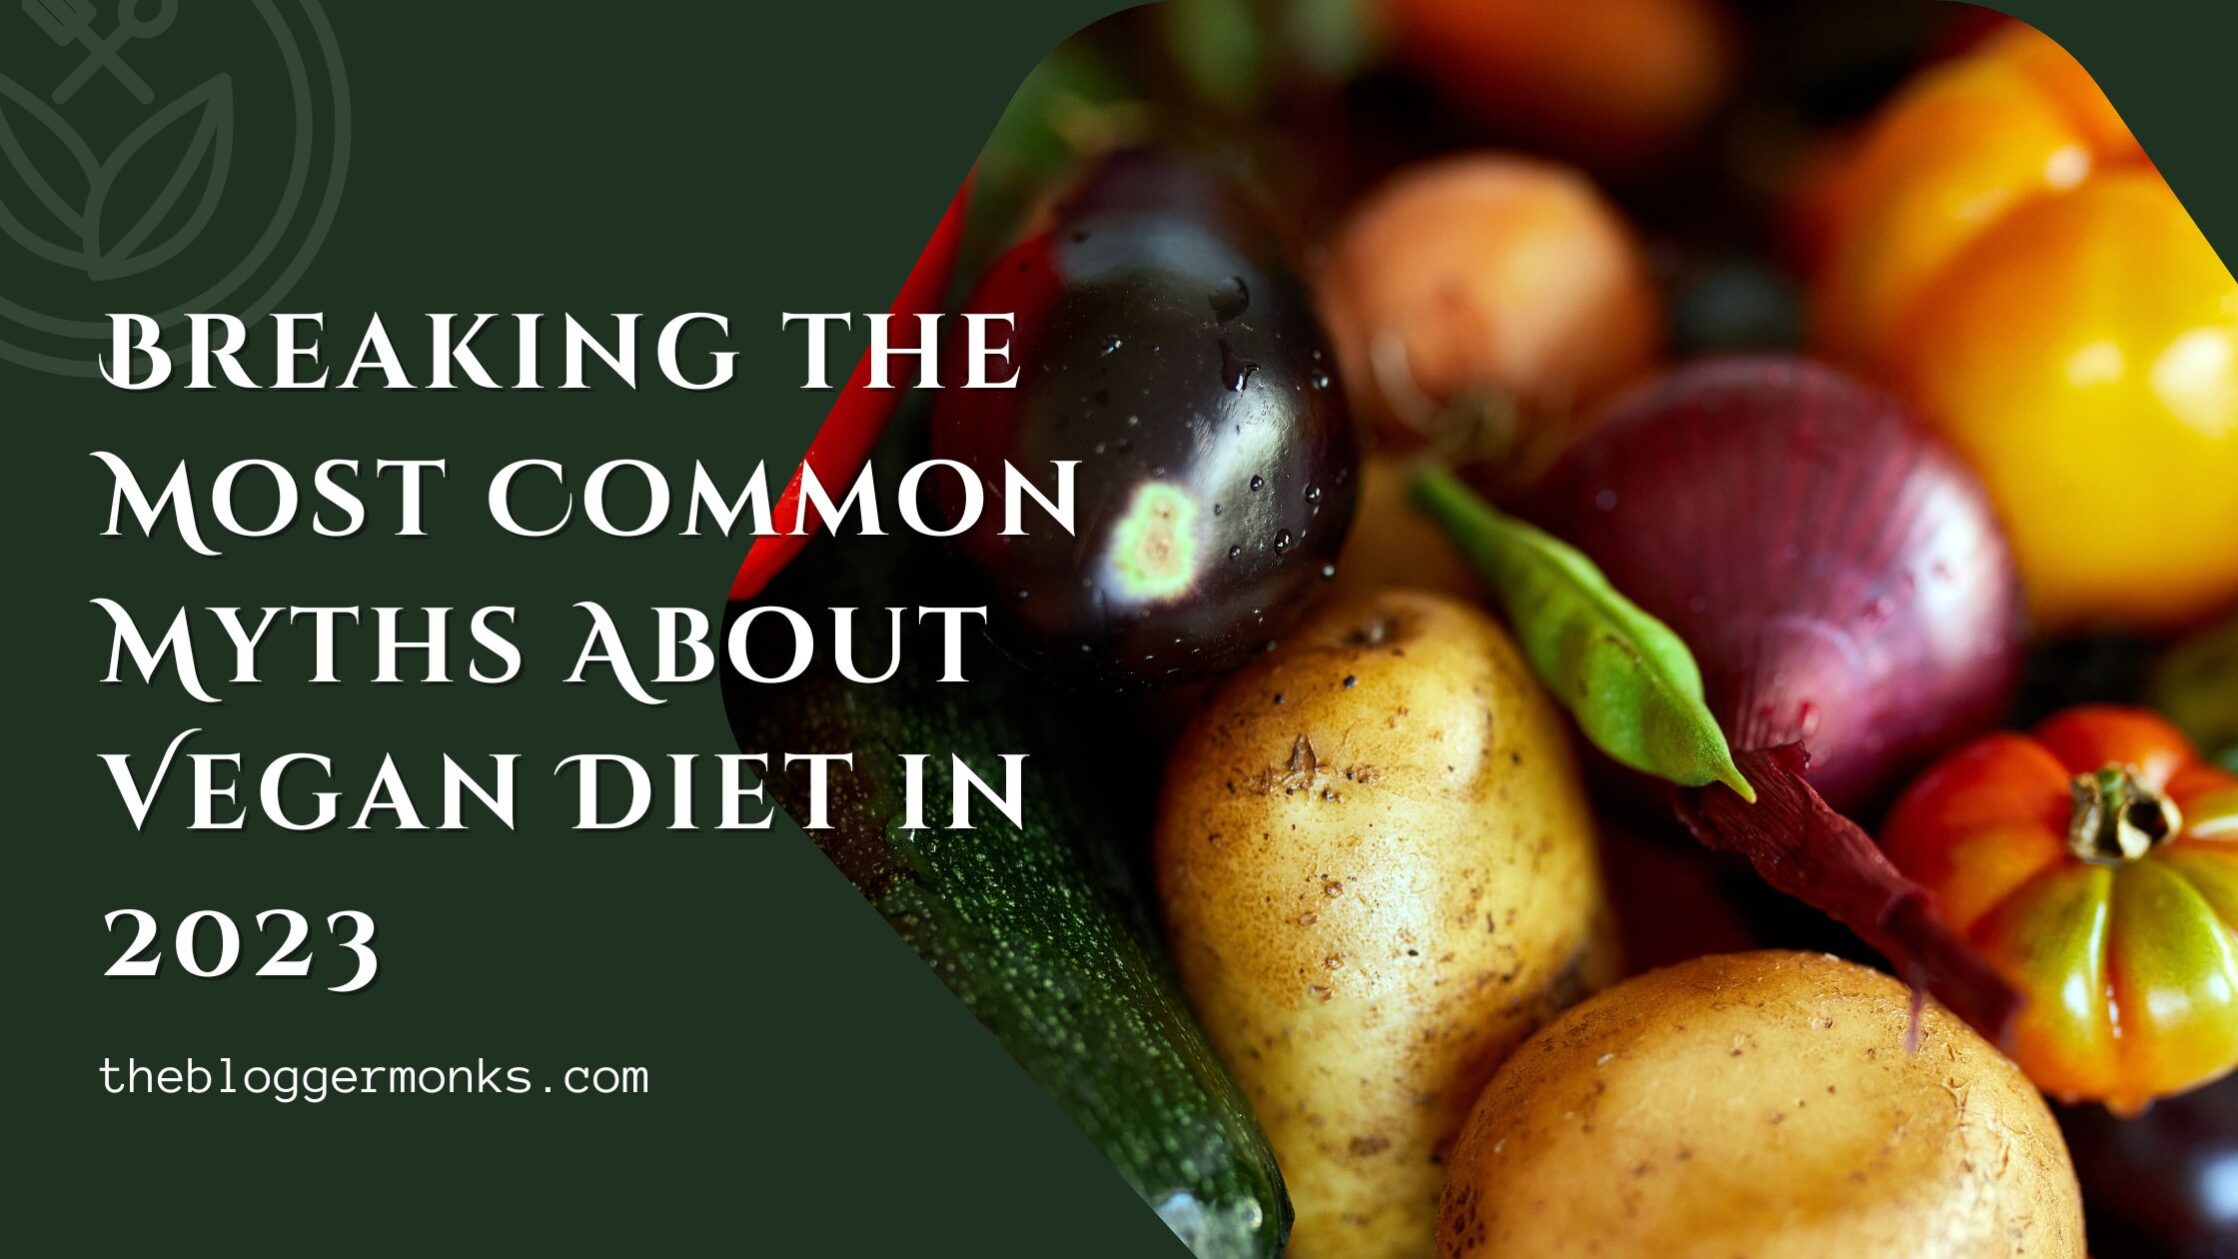 Breaking the Most Common Myths About Vegan Diet in 2023